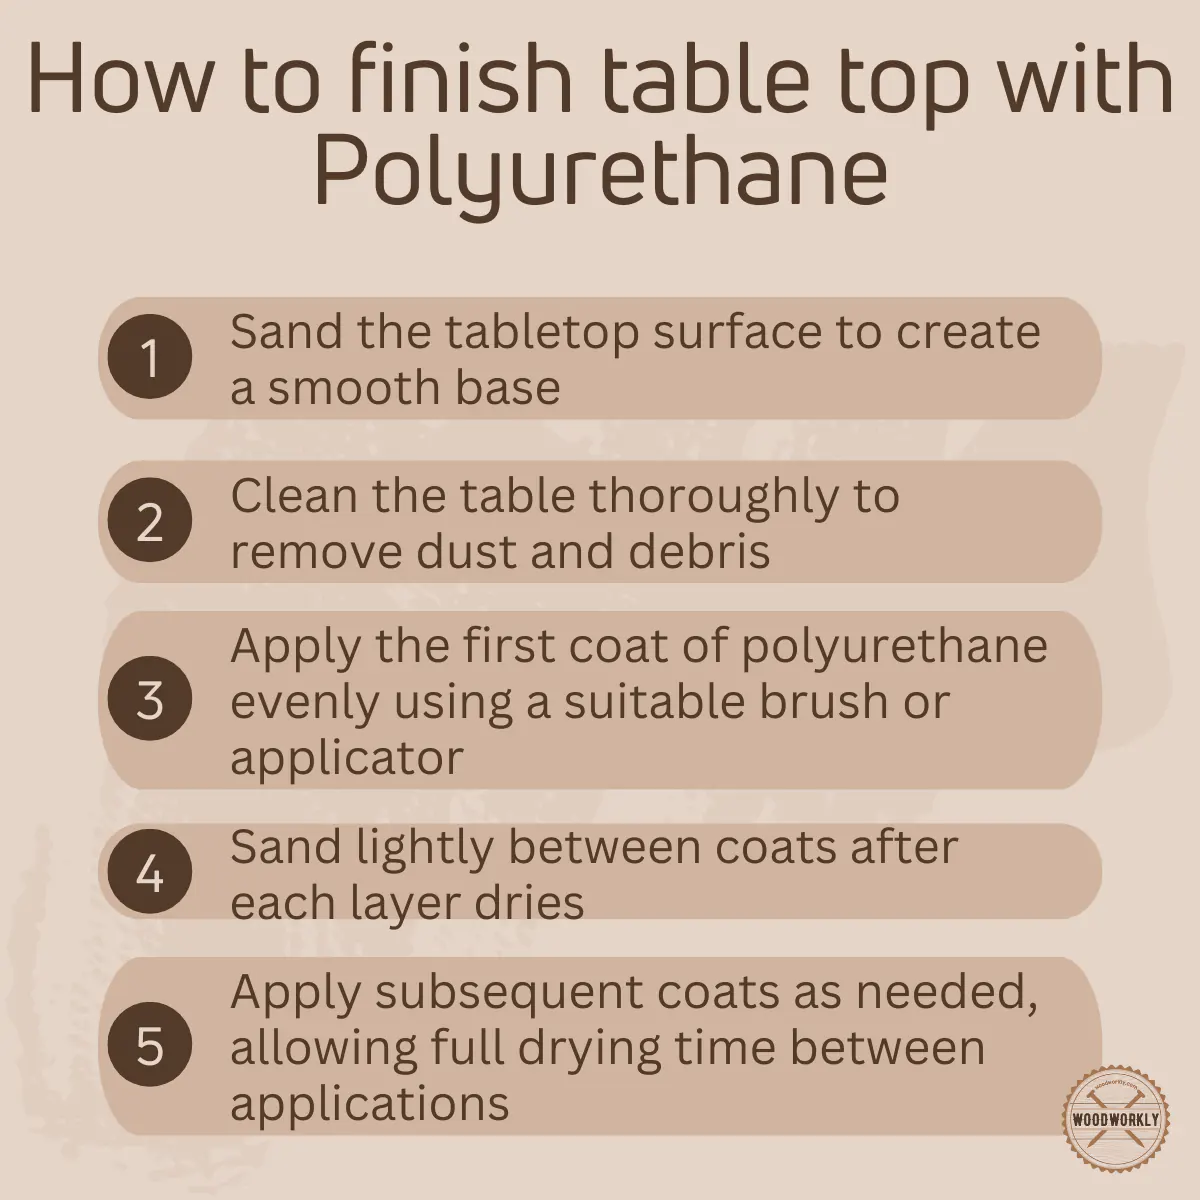 How to finish table top with Polyurethane